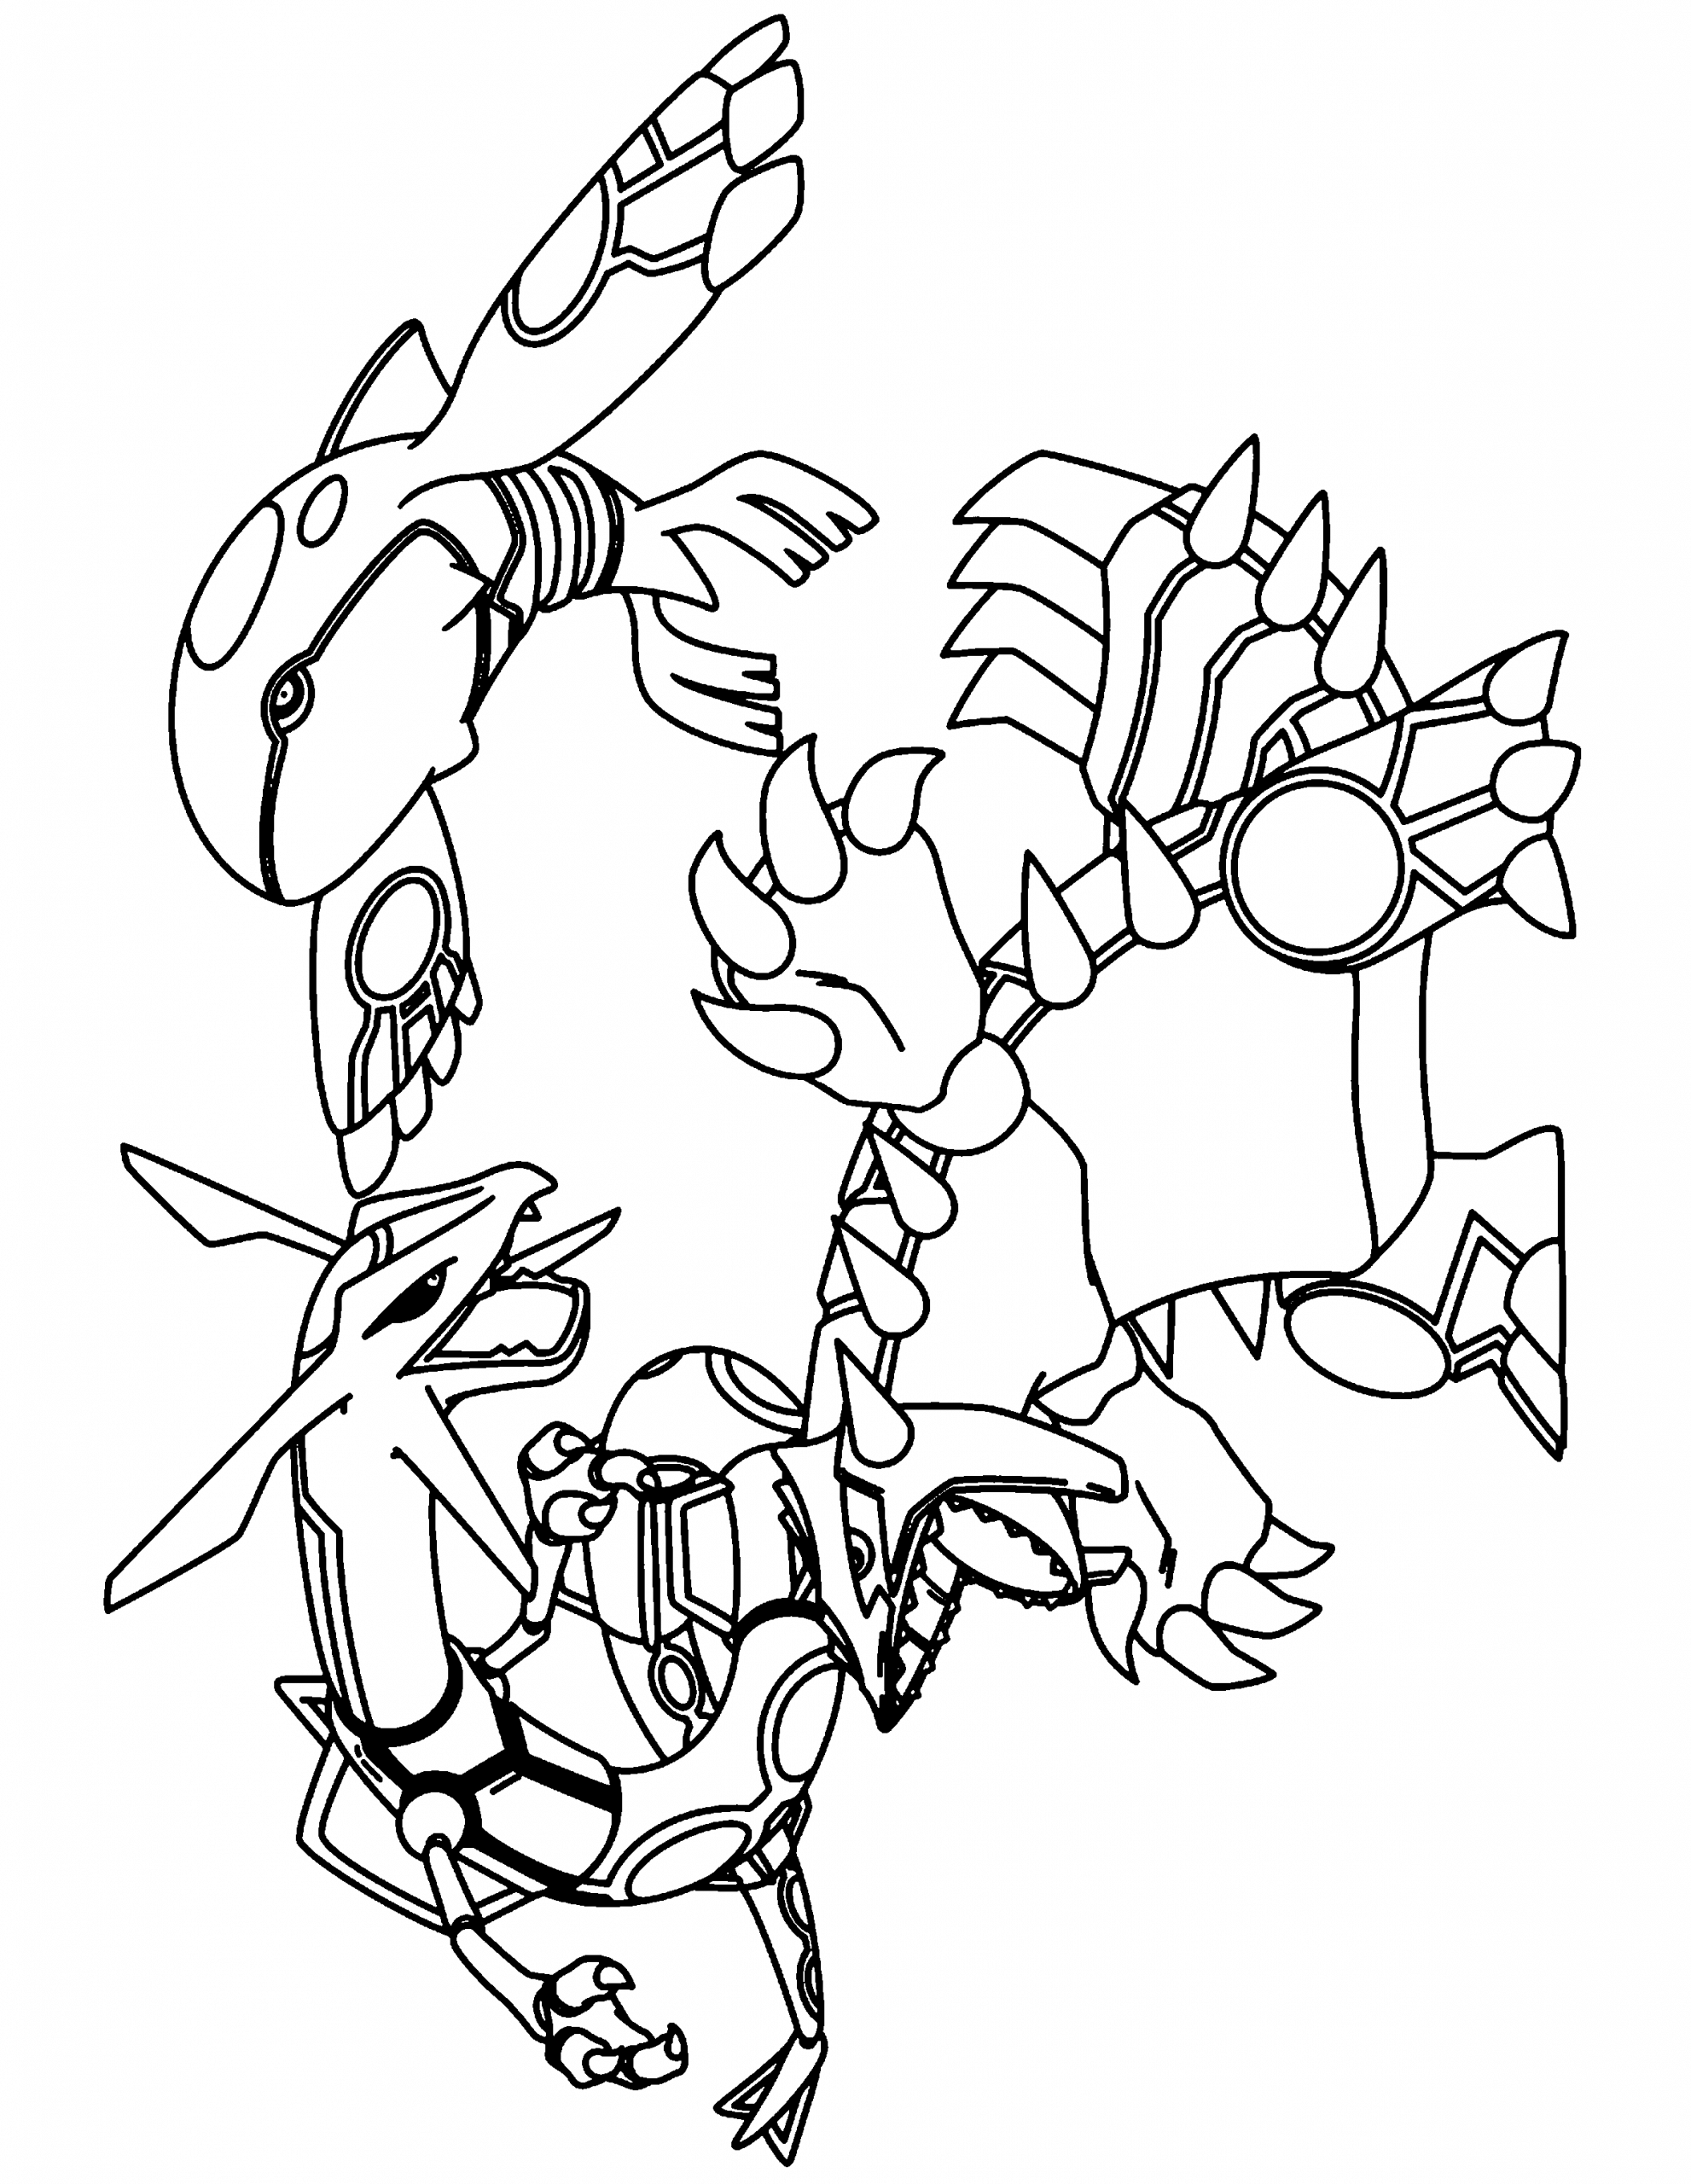 All Legendary Pokemon Coloring Pages